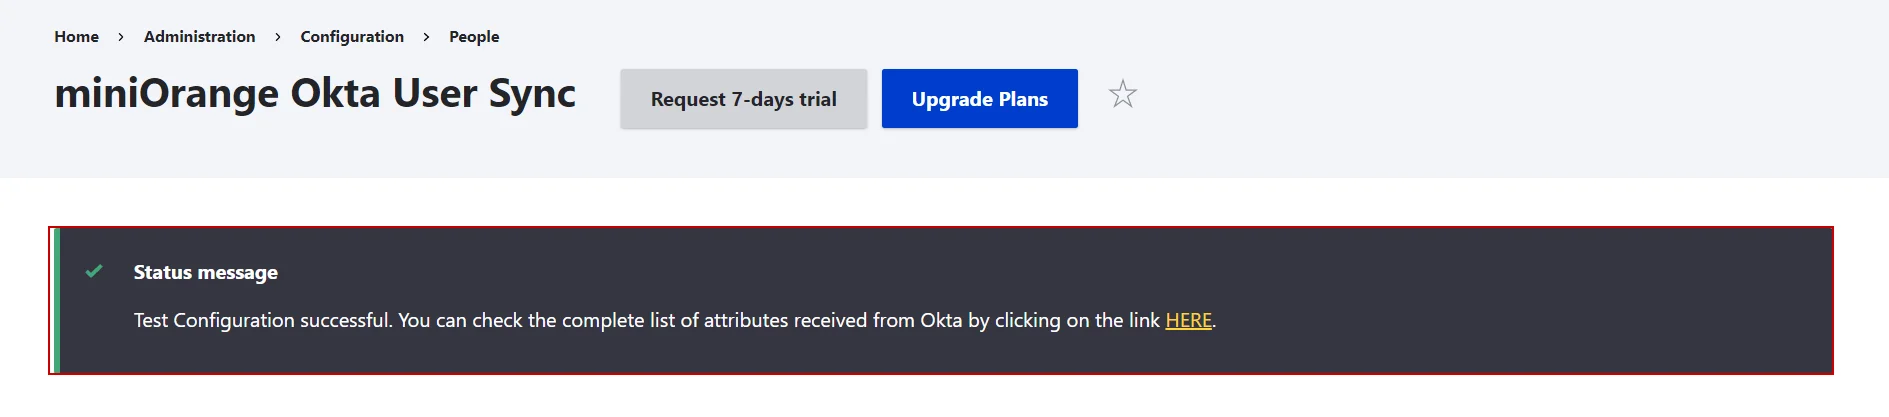 drupal okta user provisioning and sync - when you click on save and test configuration button you will received success message